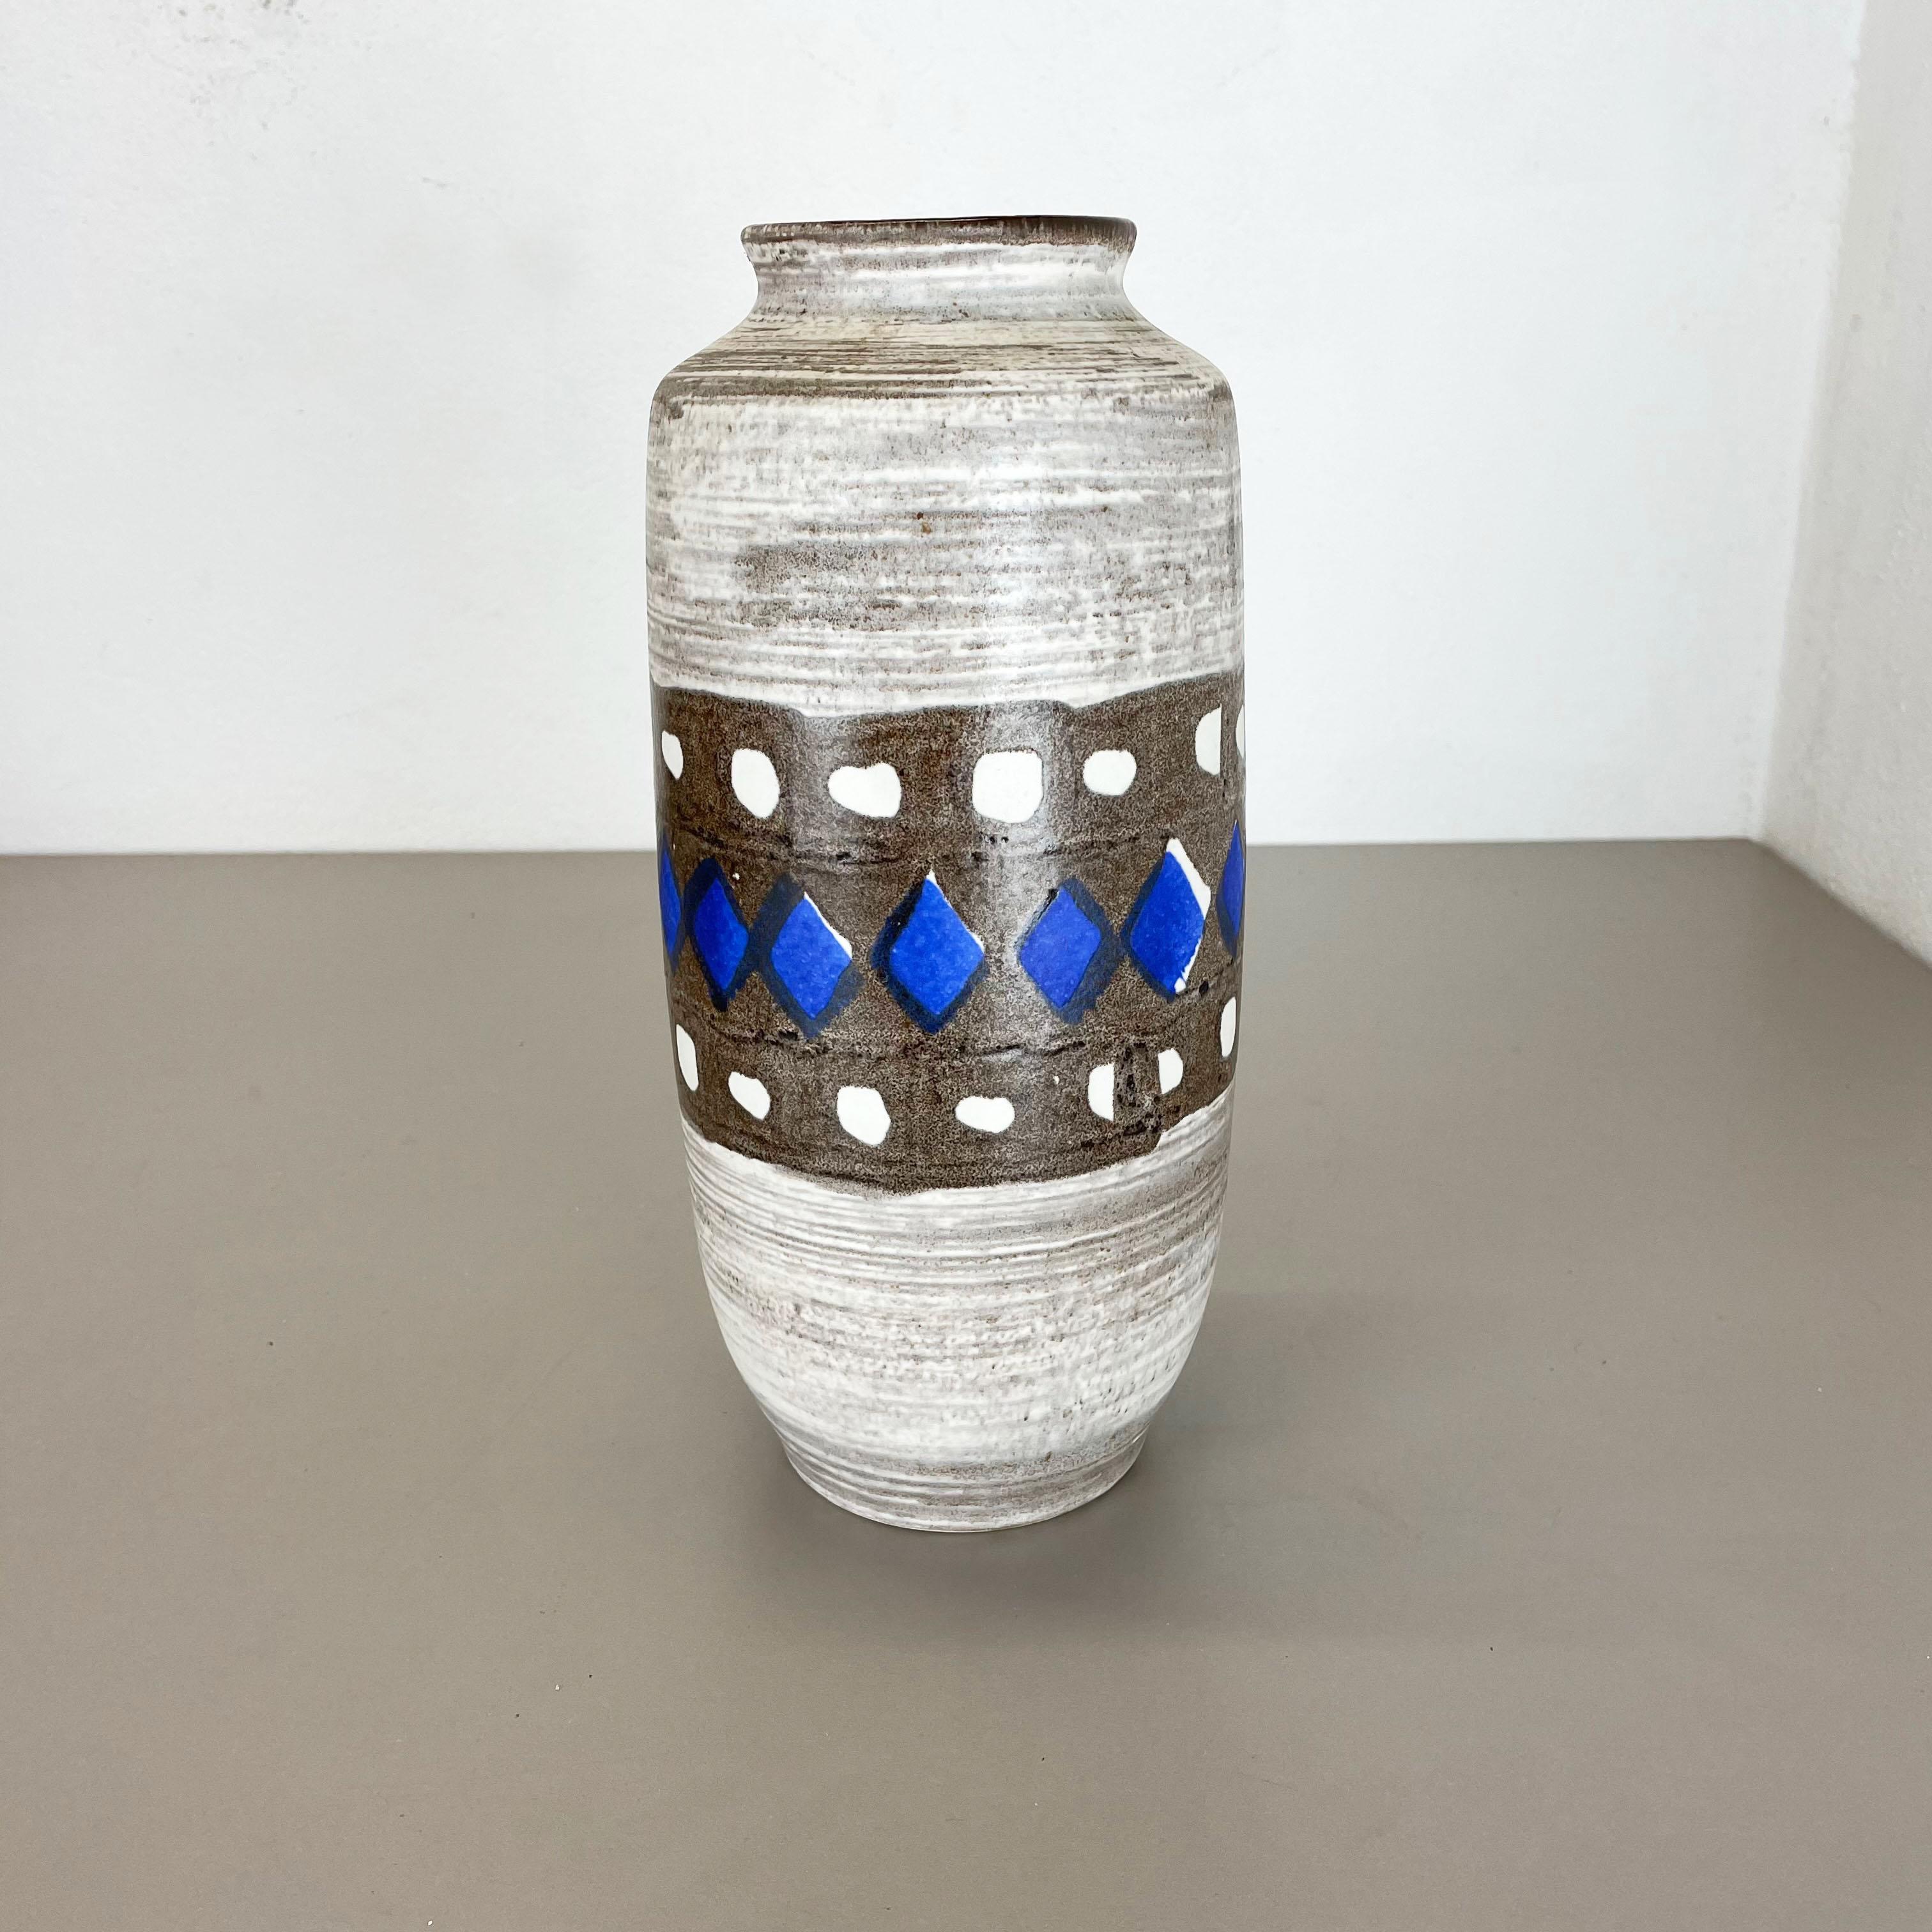 Article:

Pottery ceramic vase


Producer:

BAY Ceramic, Germany



Decade:

1970s



Description:

Original vintage 1970s pottery ceramic vase made in Germany. High quality German production with a nice abstract painting and